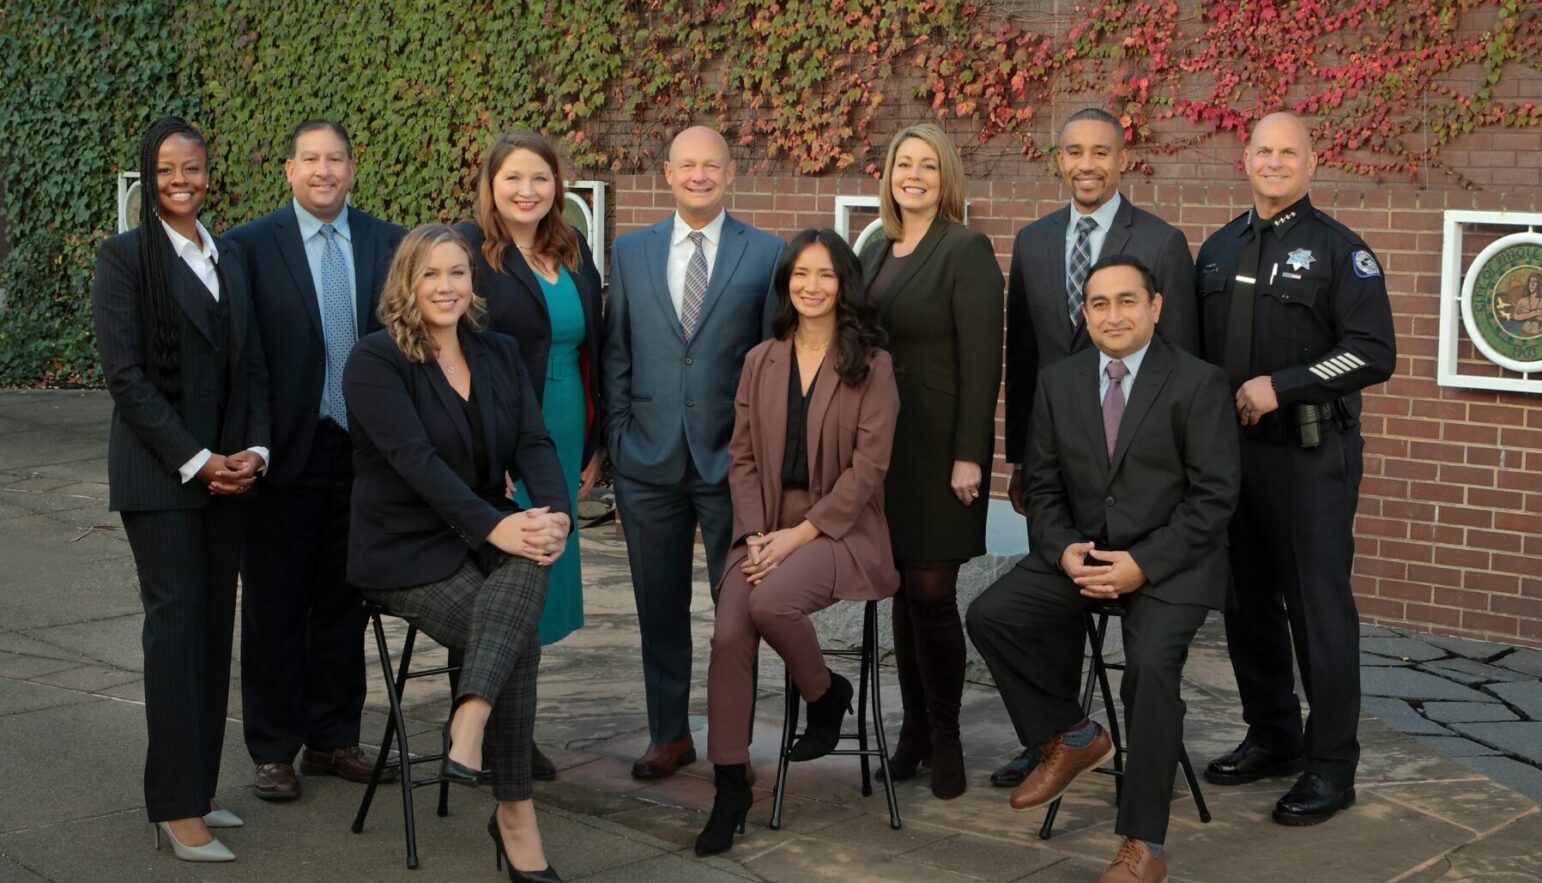 A group of 10 professionals in business attire posing for a photo outdoors. The setting features a backdrop of a brick wall covered in ivy. The group includes five women and five men, one of whom is dressed in a police uniform. They are smiling and standing or seated in two rows, projecting a collaborative and formal team image.